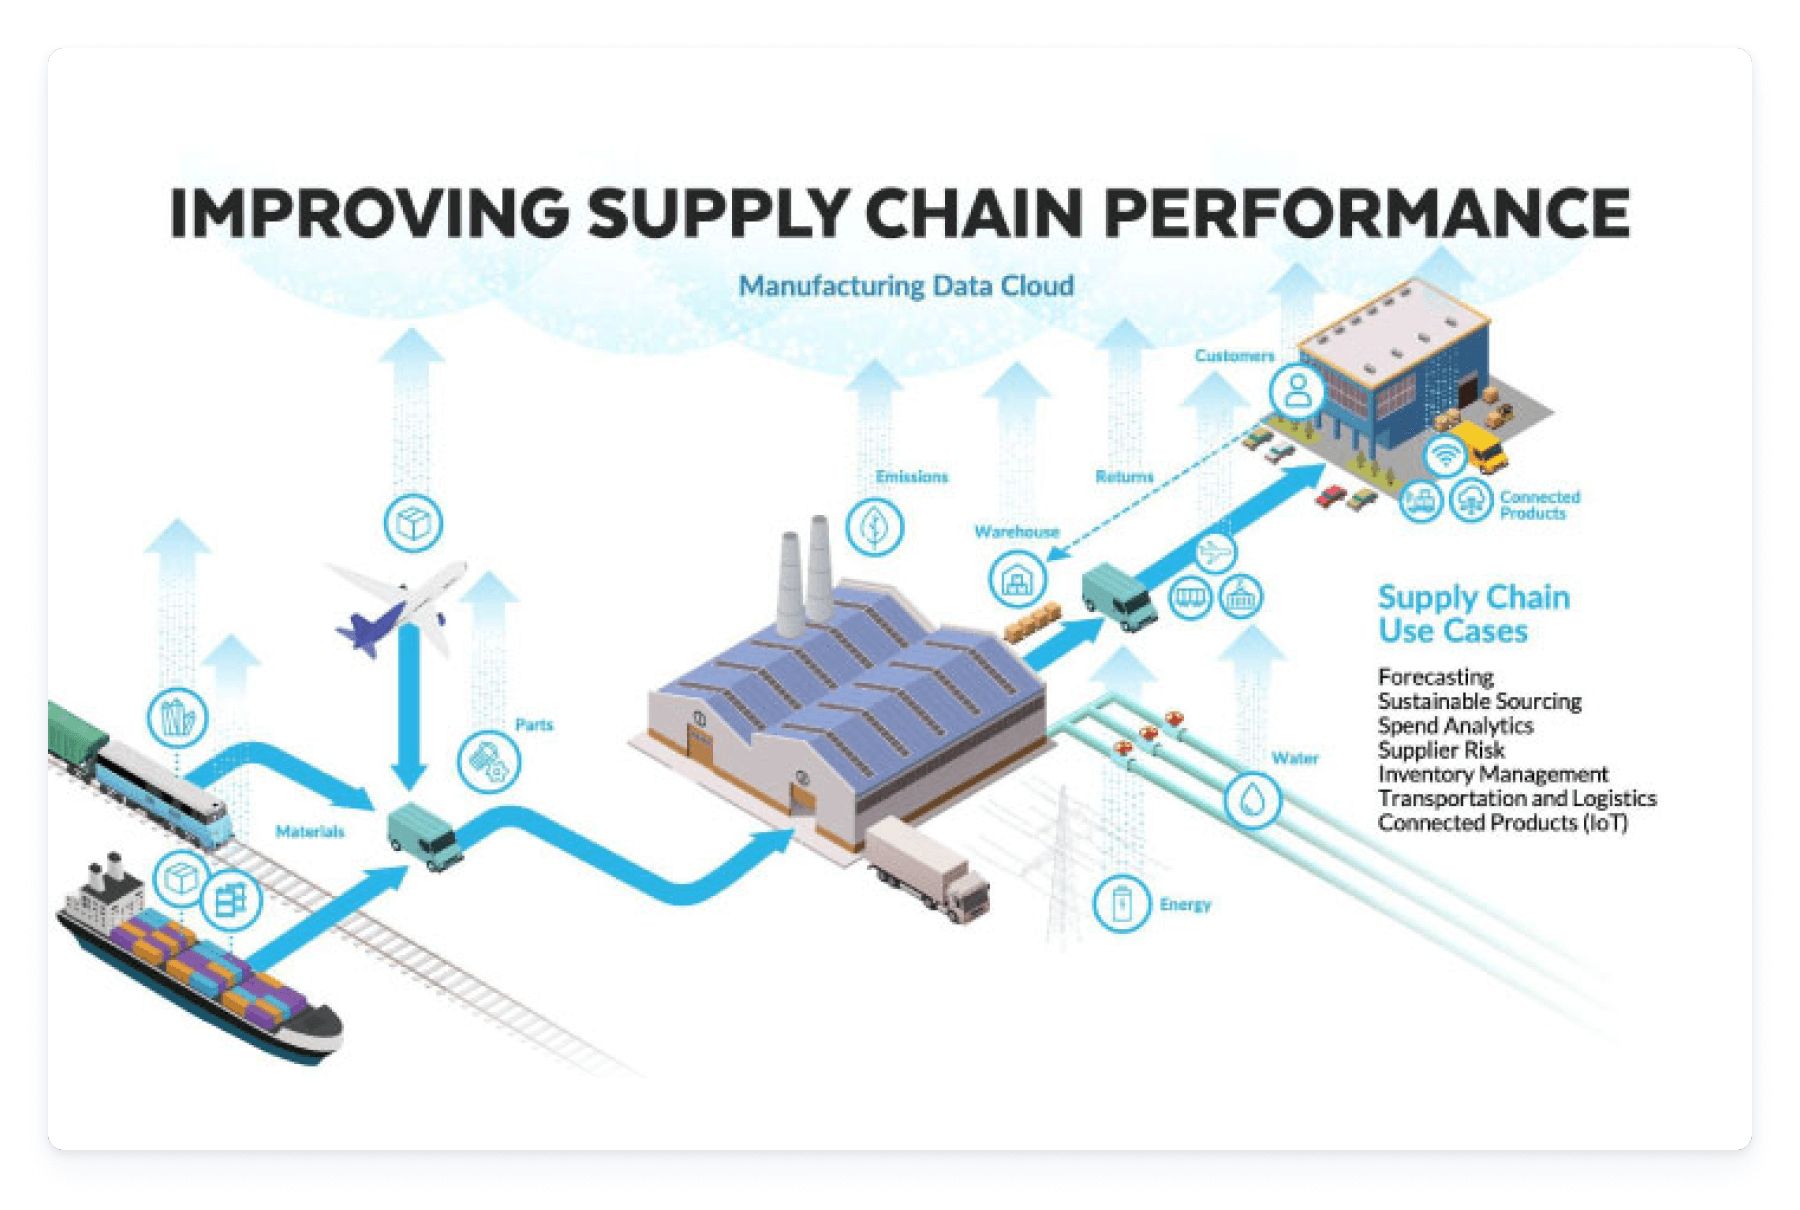 Diagram showing how Snowflake helps the manufacturing sector improve supply chain perofrmance